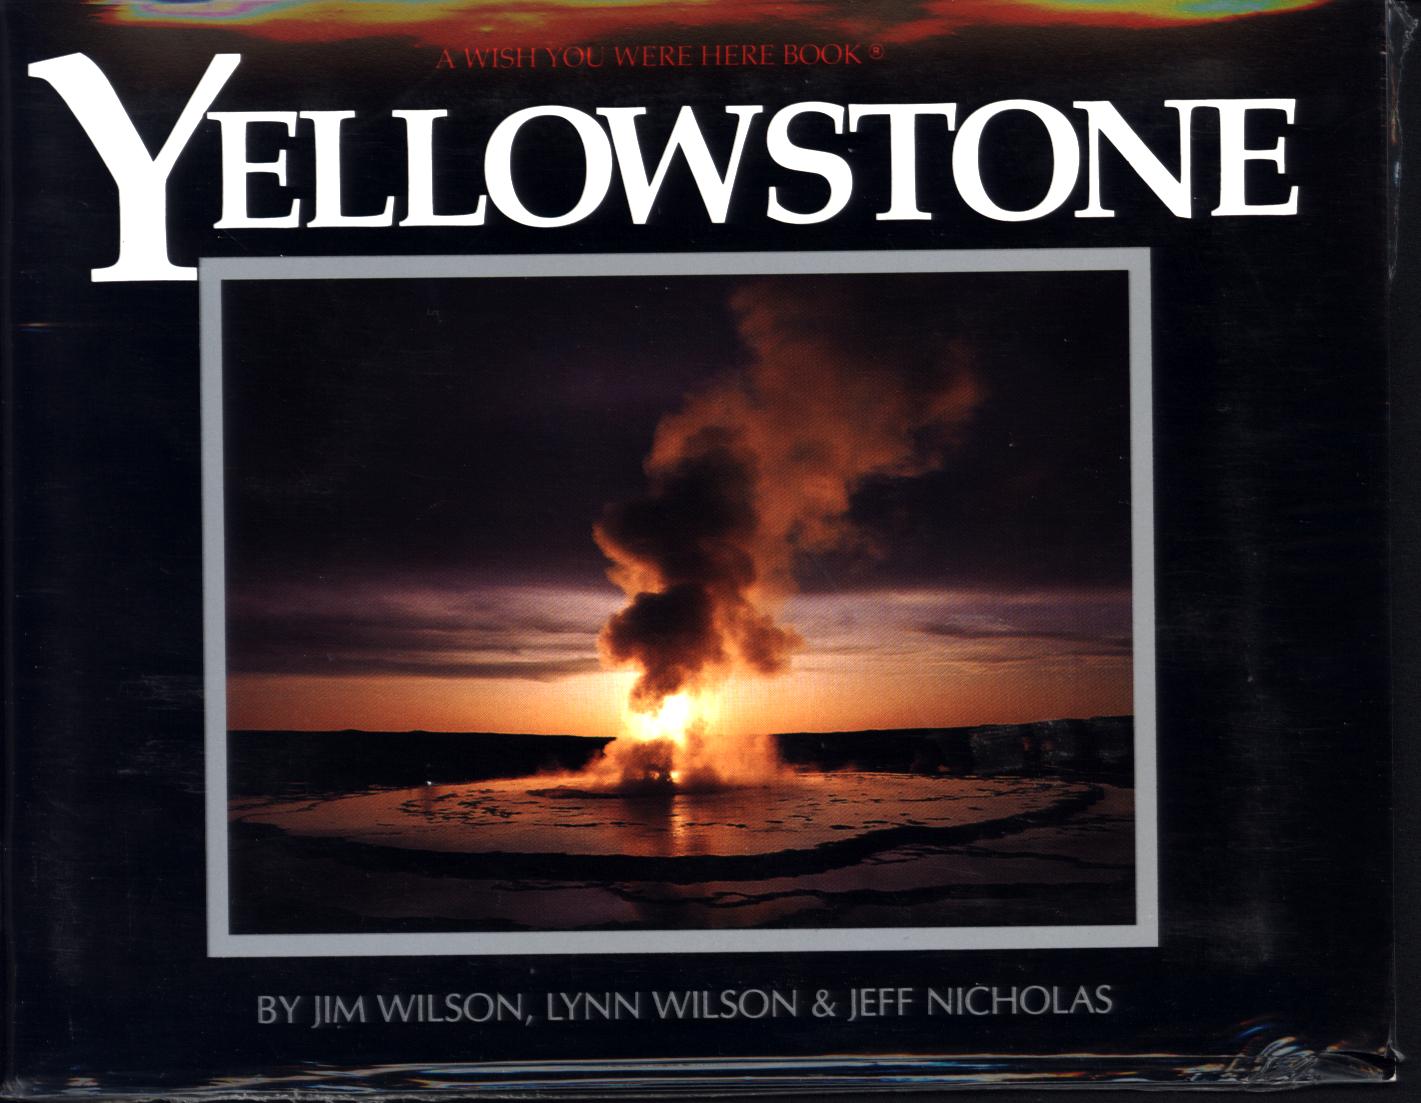 YELLOWSTONE: a Wish You Were Here book.